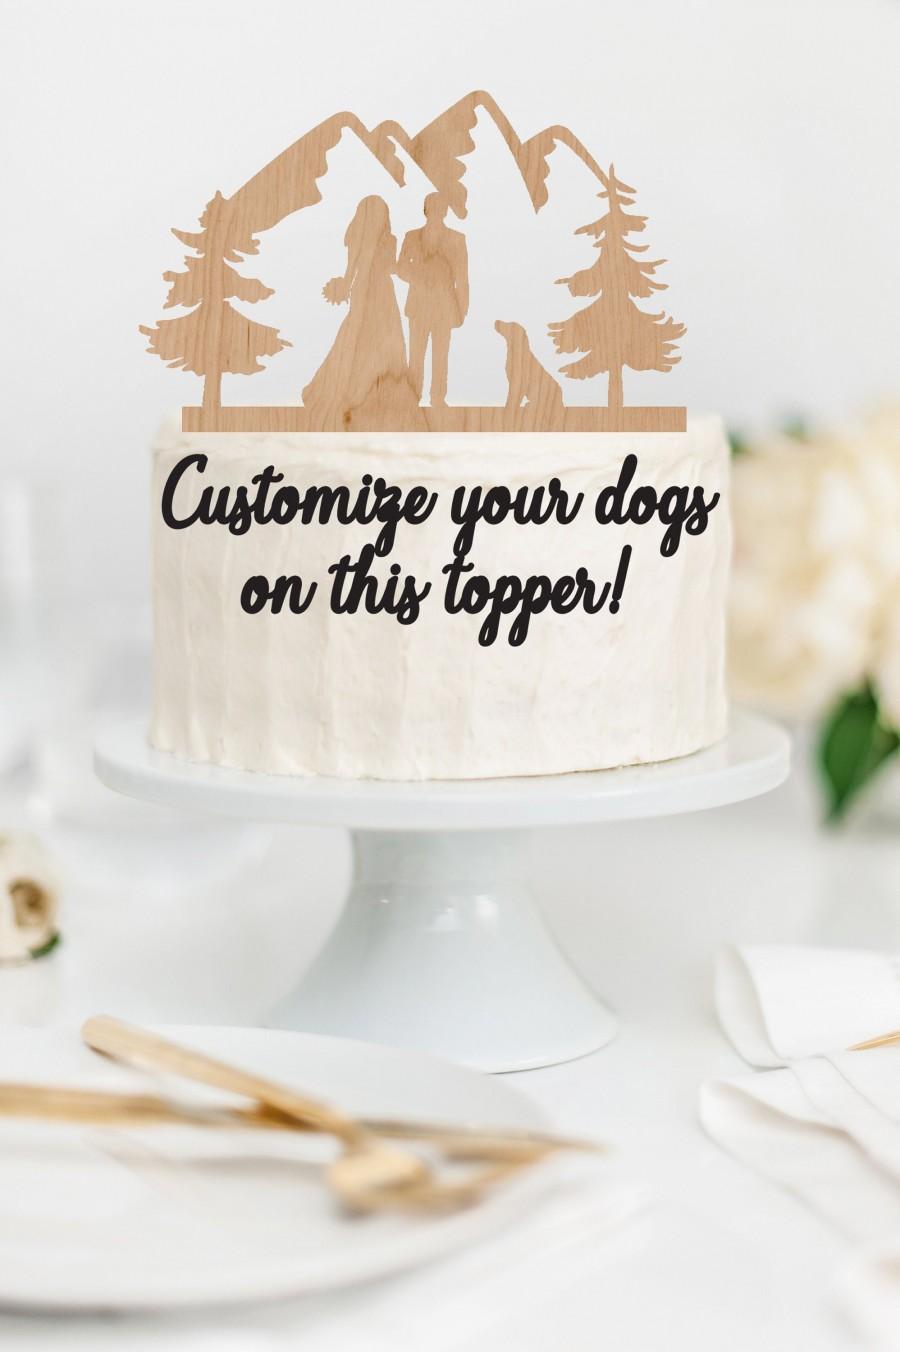 Hochzeit - BRIDE GROOM Couple with DOG or Dogs Wood Mountain Wedding Cake Topper / Mountain outdoor bride groom cake topper / Wedding cake topper